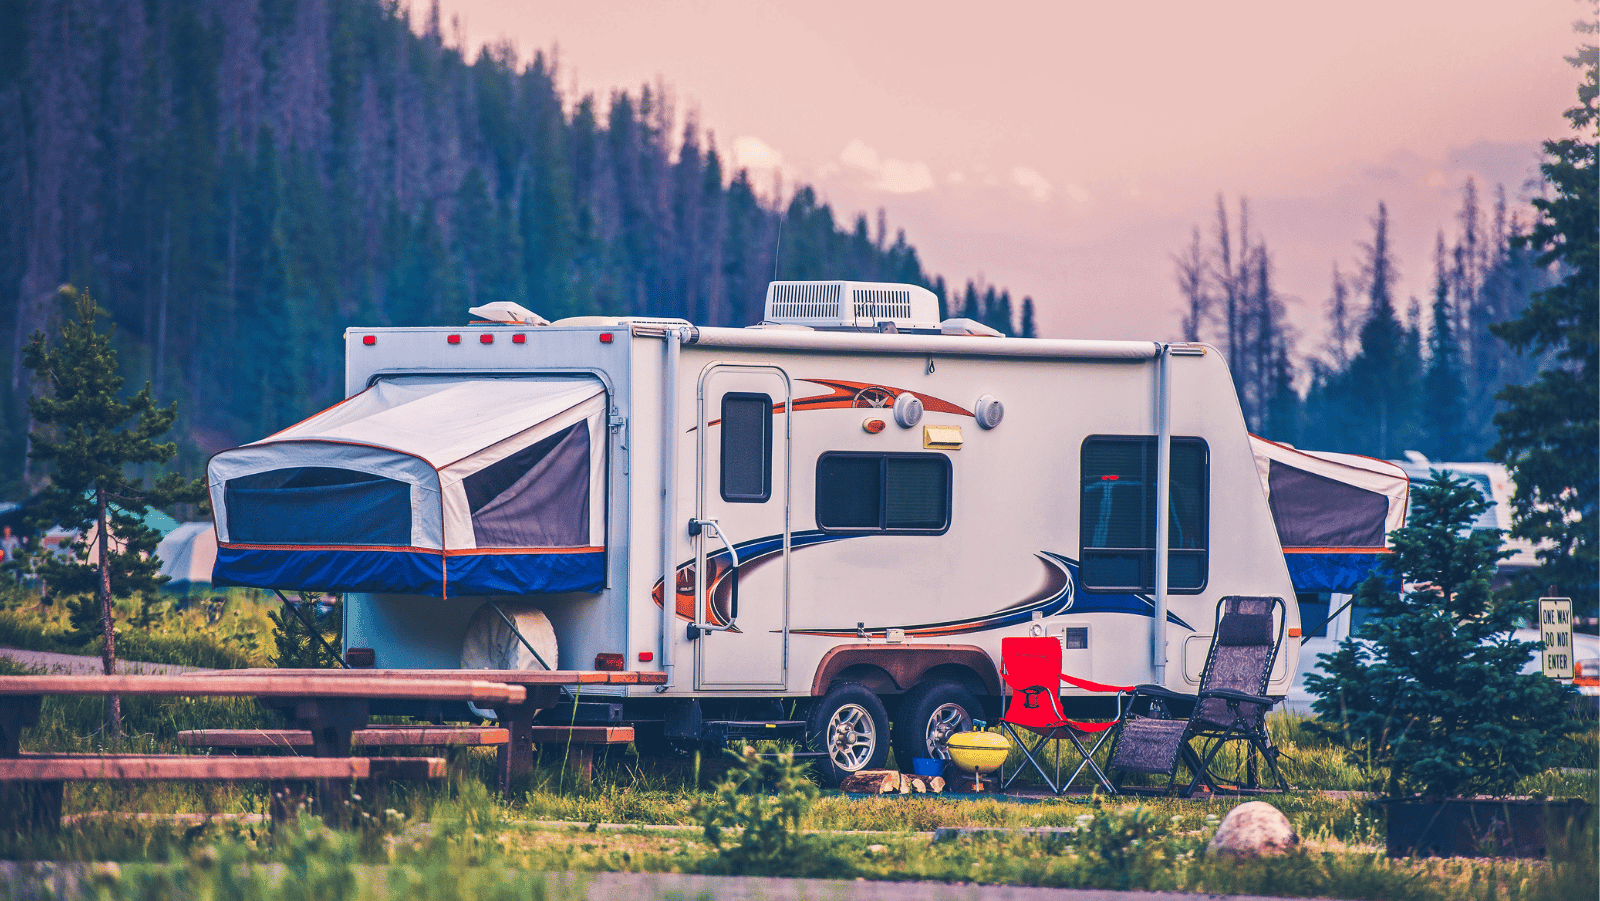 What Is a Campers Insurance Policy - How To Get the Cheapest RV Insurance?